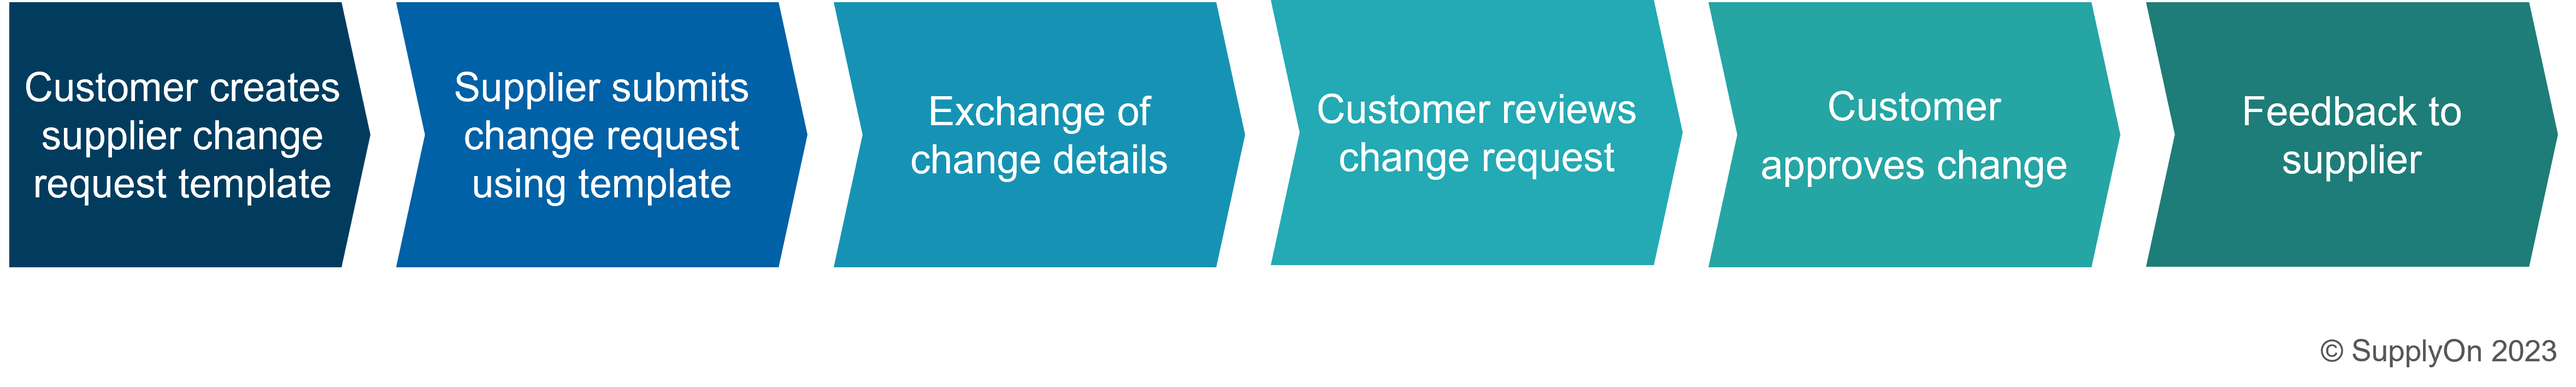 Process chain of the adapted Technical Review process: customer creates supplier change request template > supplier submits change request using template > exchange of change details > customer reviews change request > feedback to supplier